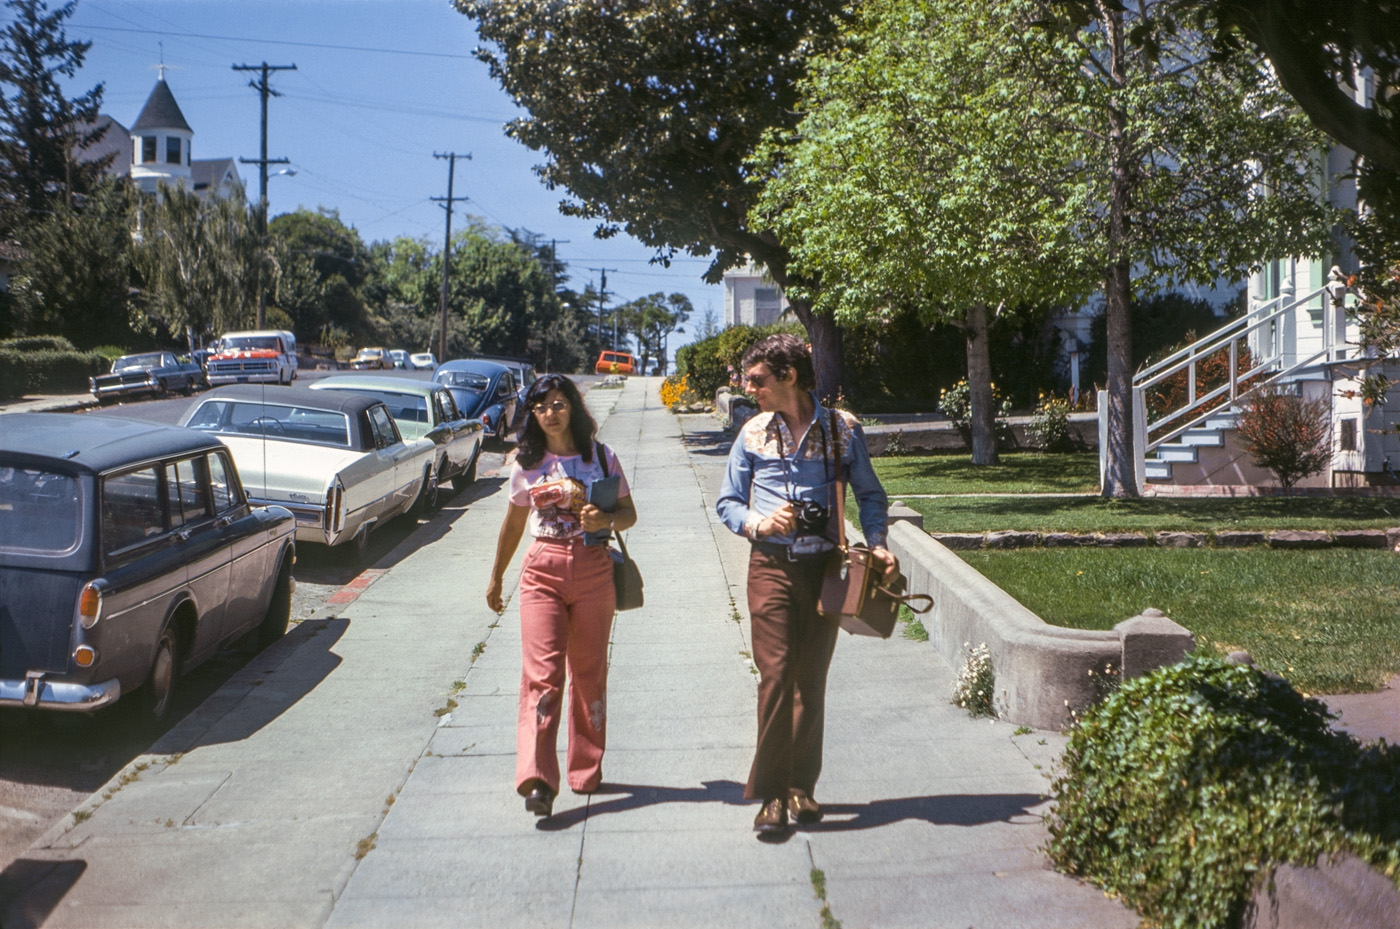 August 1975. My friend snapped this Kodachrome of his wife and me strolling along the 200 block of Keller Street in Petaluma, California. I'm decked out in my 70s-style duds, including bell-bottoms, waffle stompers, whatever you call that kind of shirt, plus my Konica Autoreflex T and camera bag, she in her Petaluma tee shirt, and Keller Street in Victorians, Volkswagens, Cadillacs and Pontiacs, not to mention the ubiquitous Ford F-150 pickup. View full size.